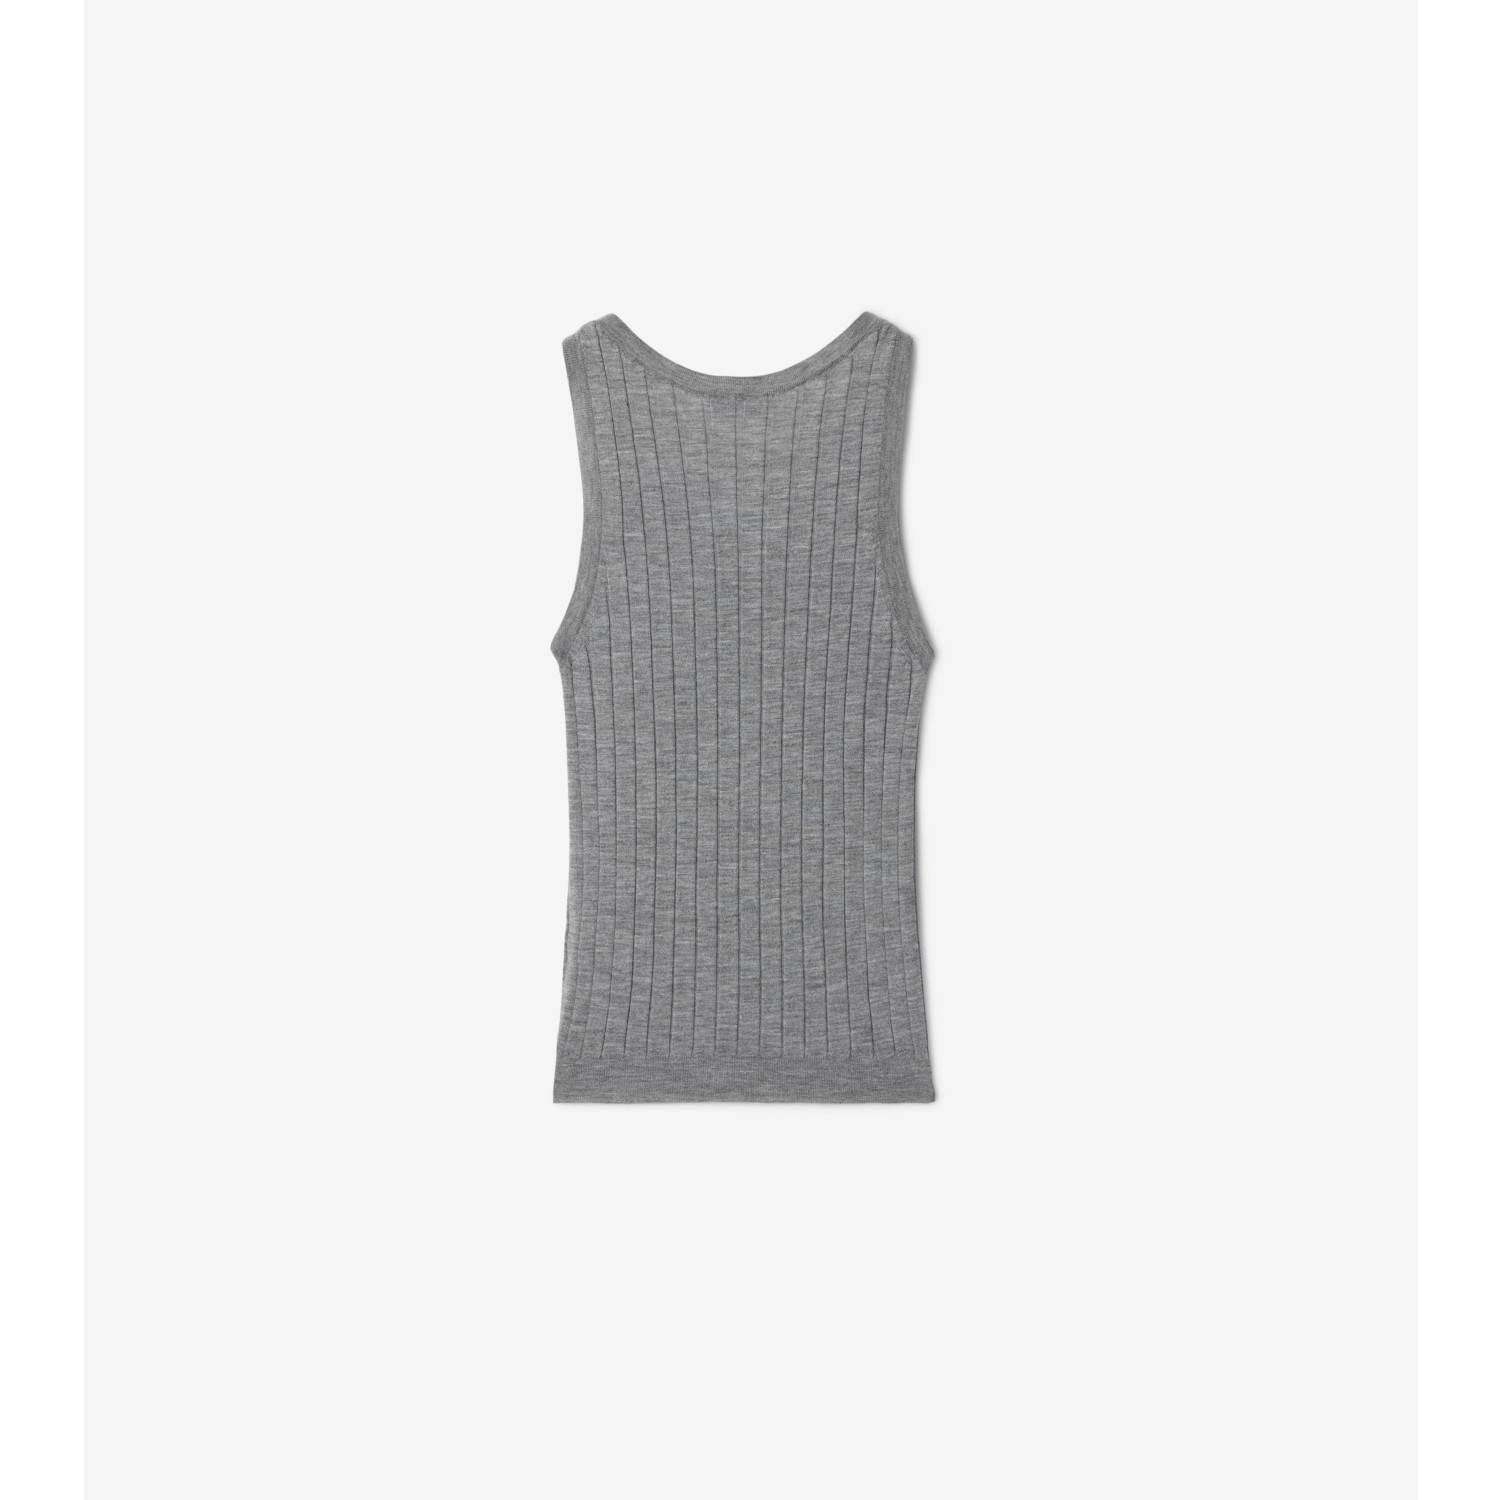 STRUCTURED MESH KNIT TANK - Taupe gray